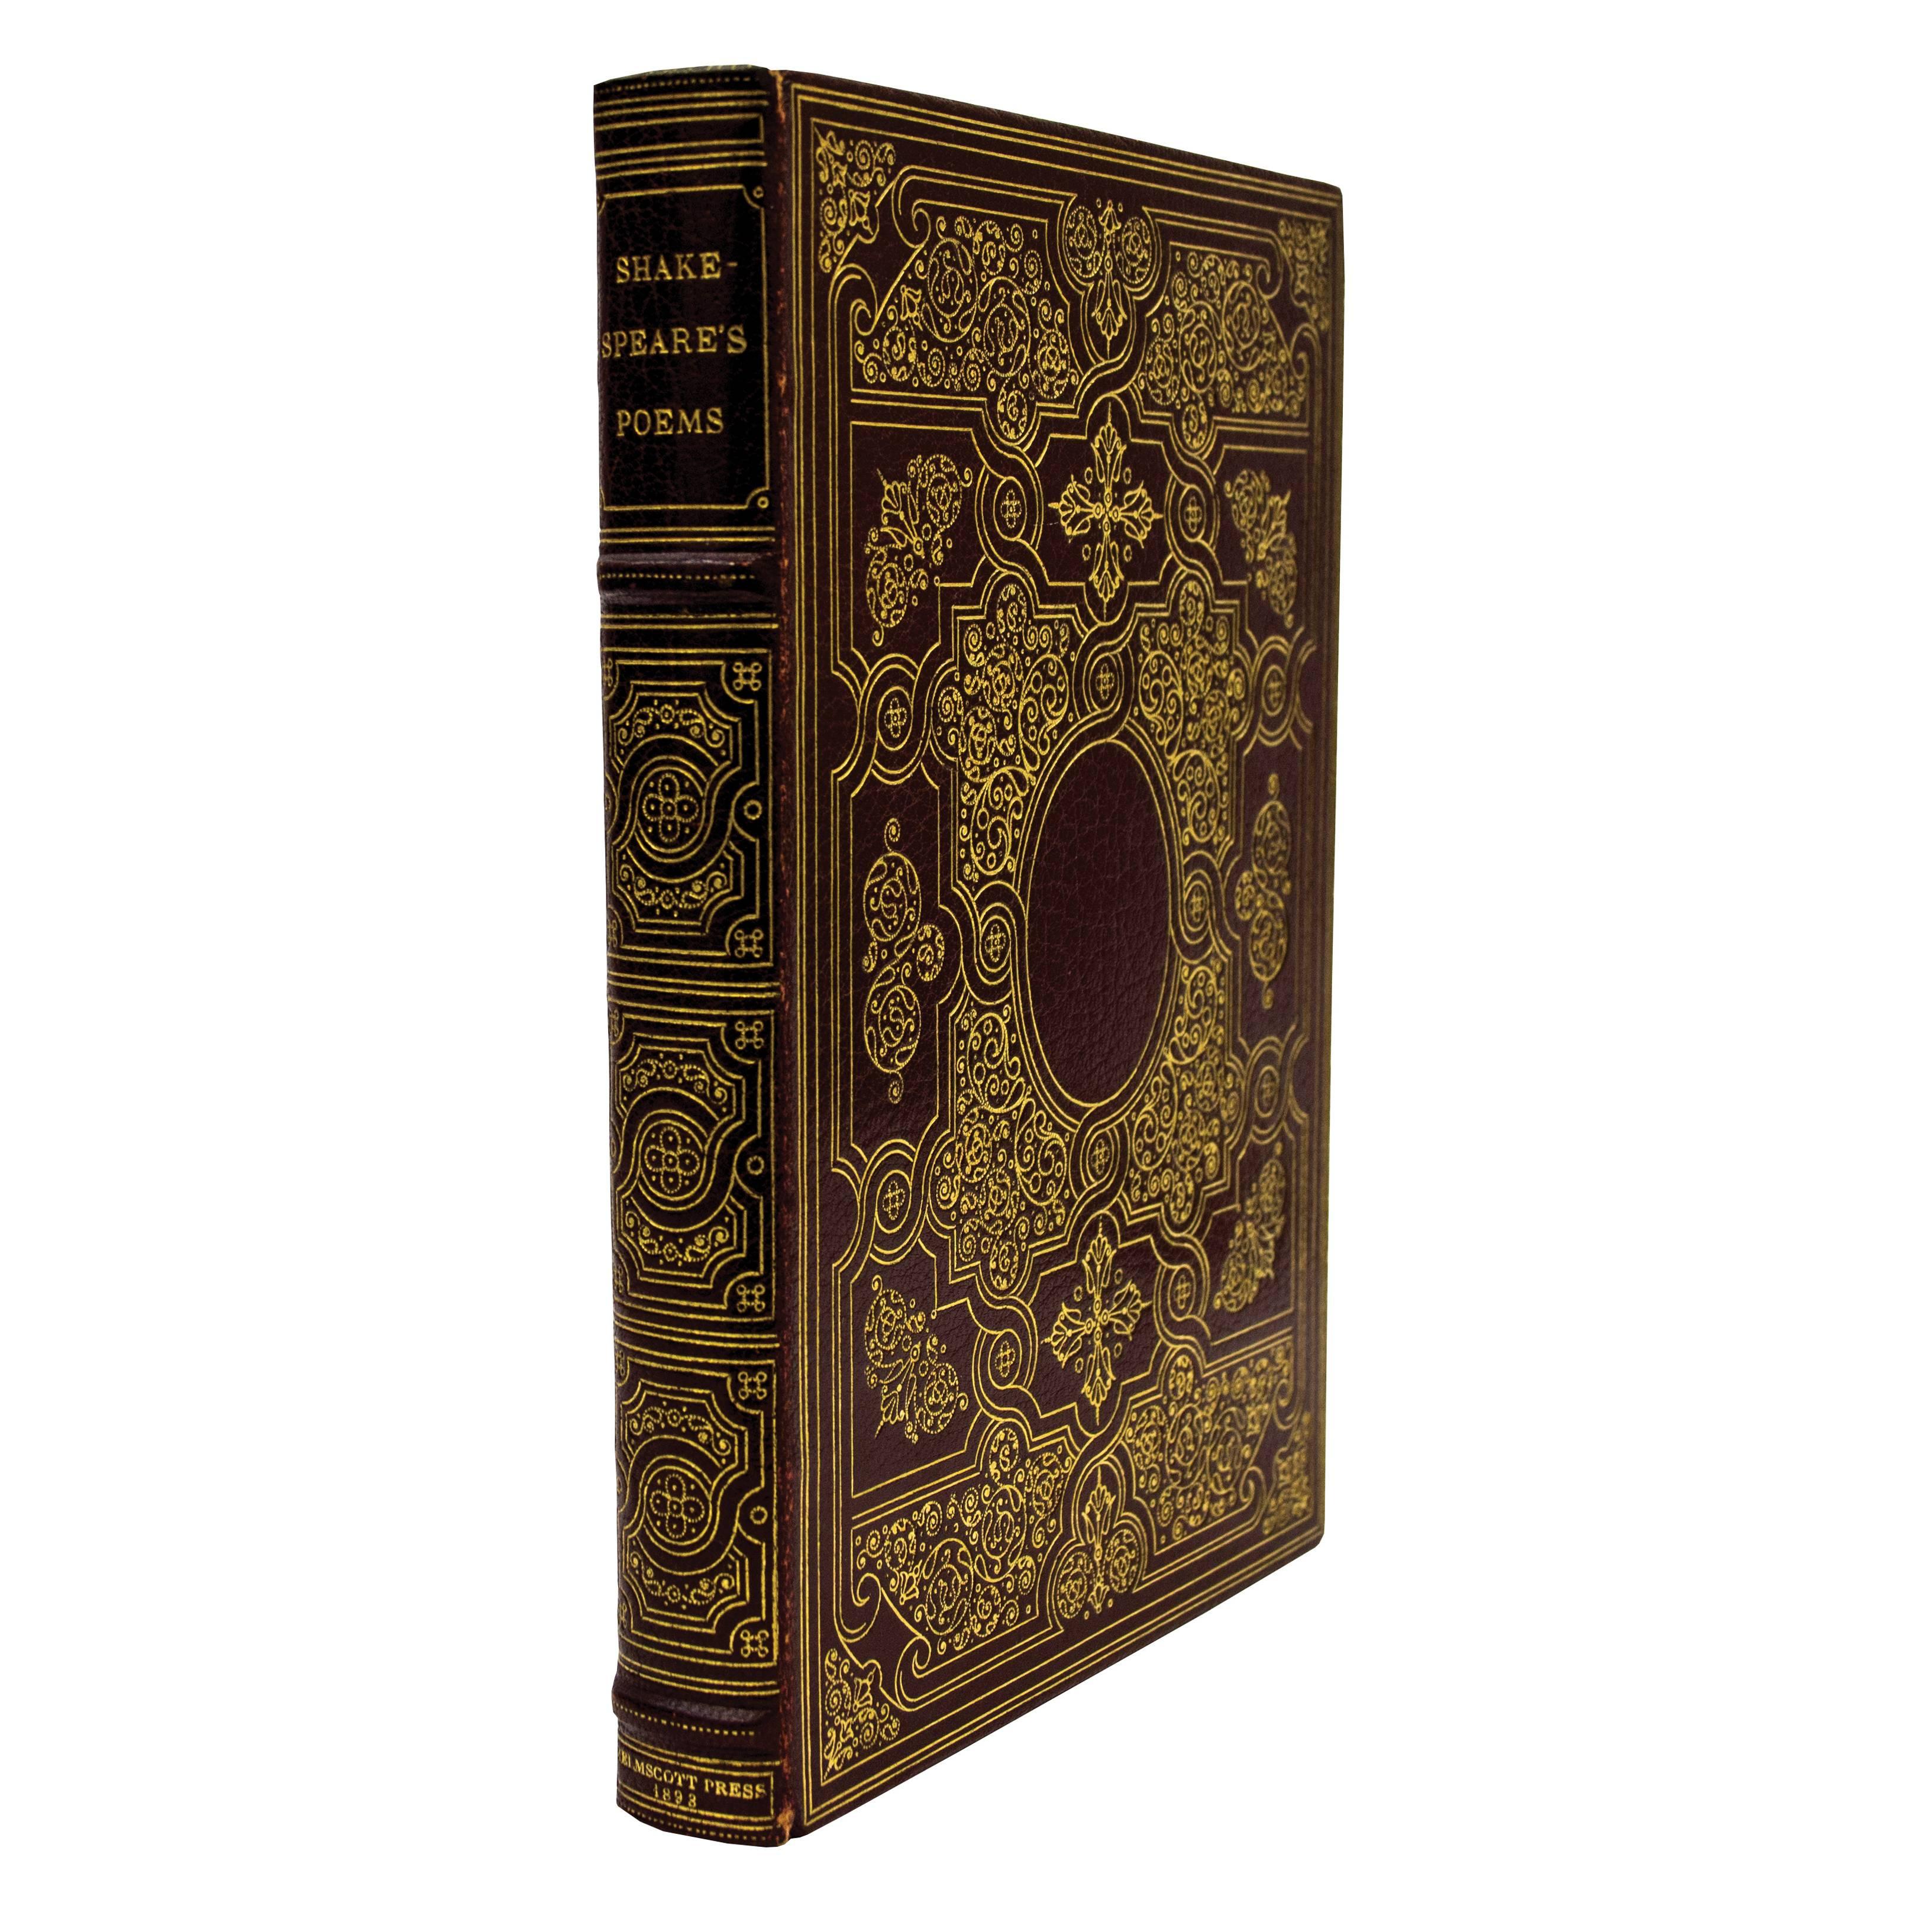 The Poems of William Shakespeare Printed at the Kelmscott Press - Art by William Morris